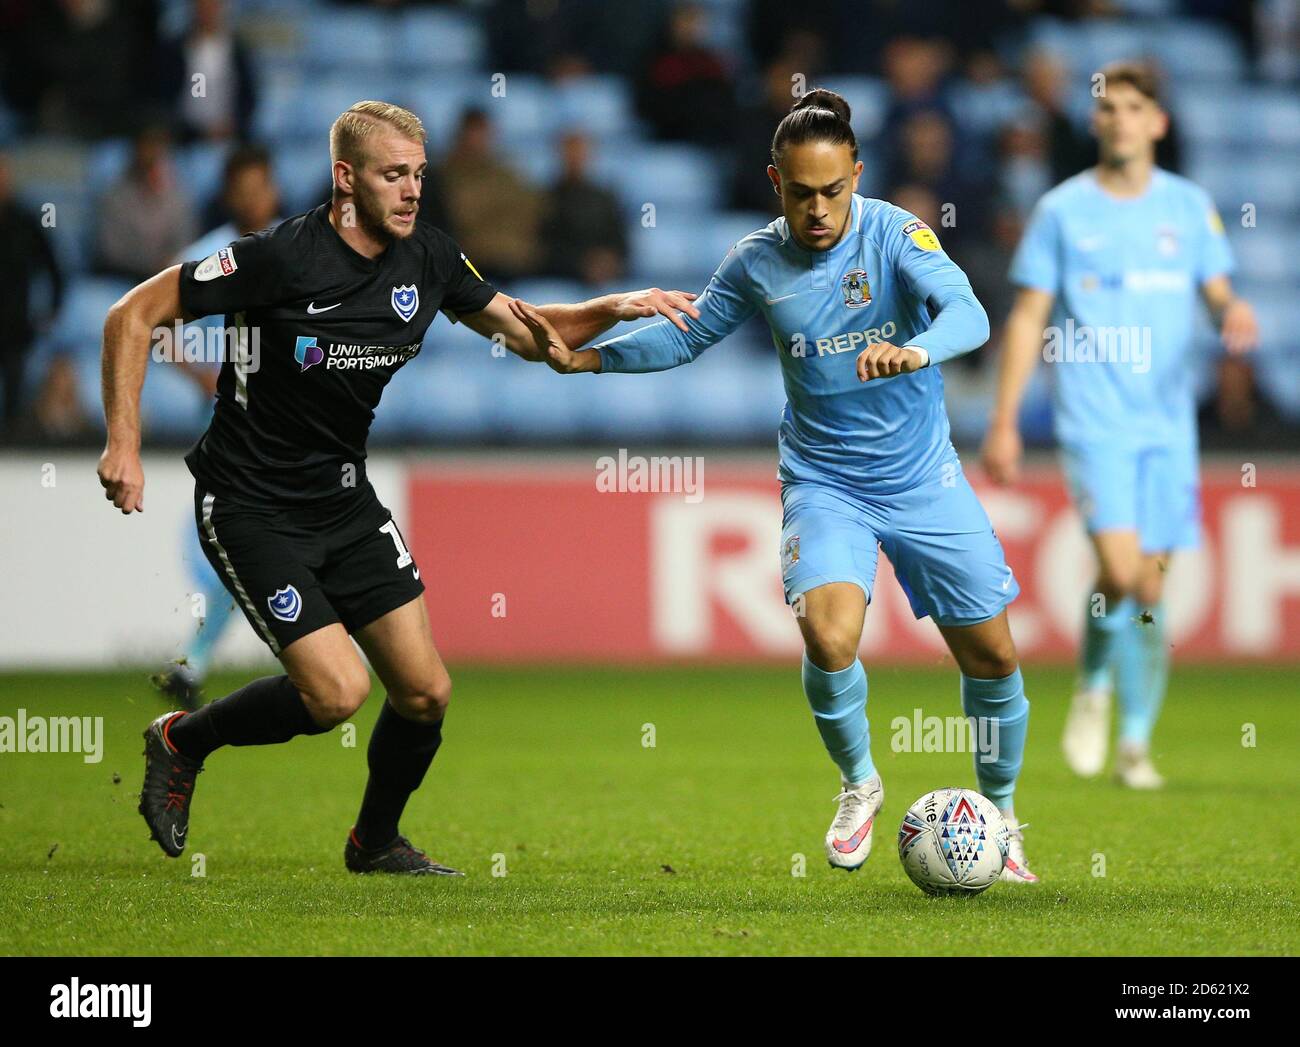 Coventry City's Jodi Jones (right) and Portsmouth's Jack Whatmough battle  for the ball Stock Photo - Alamy